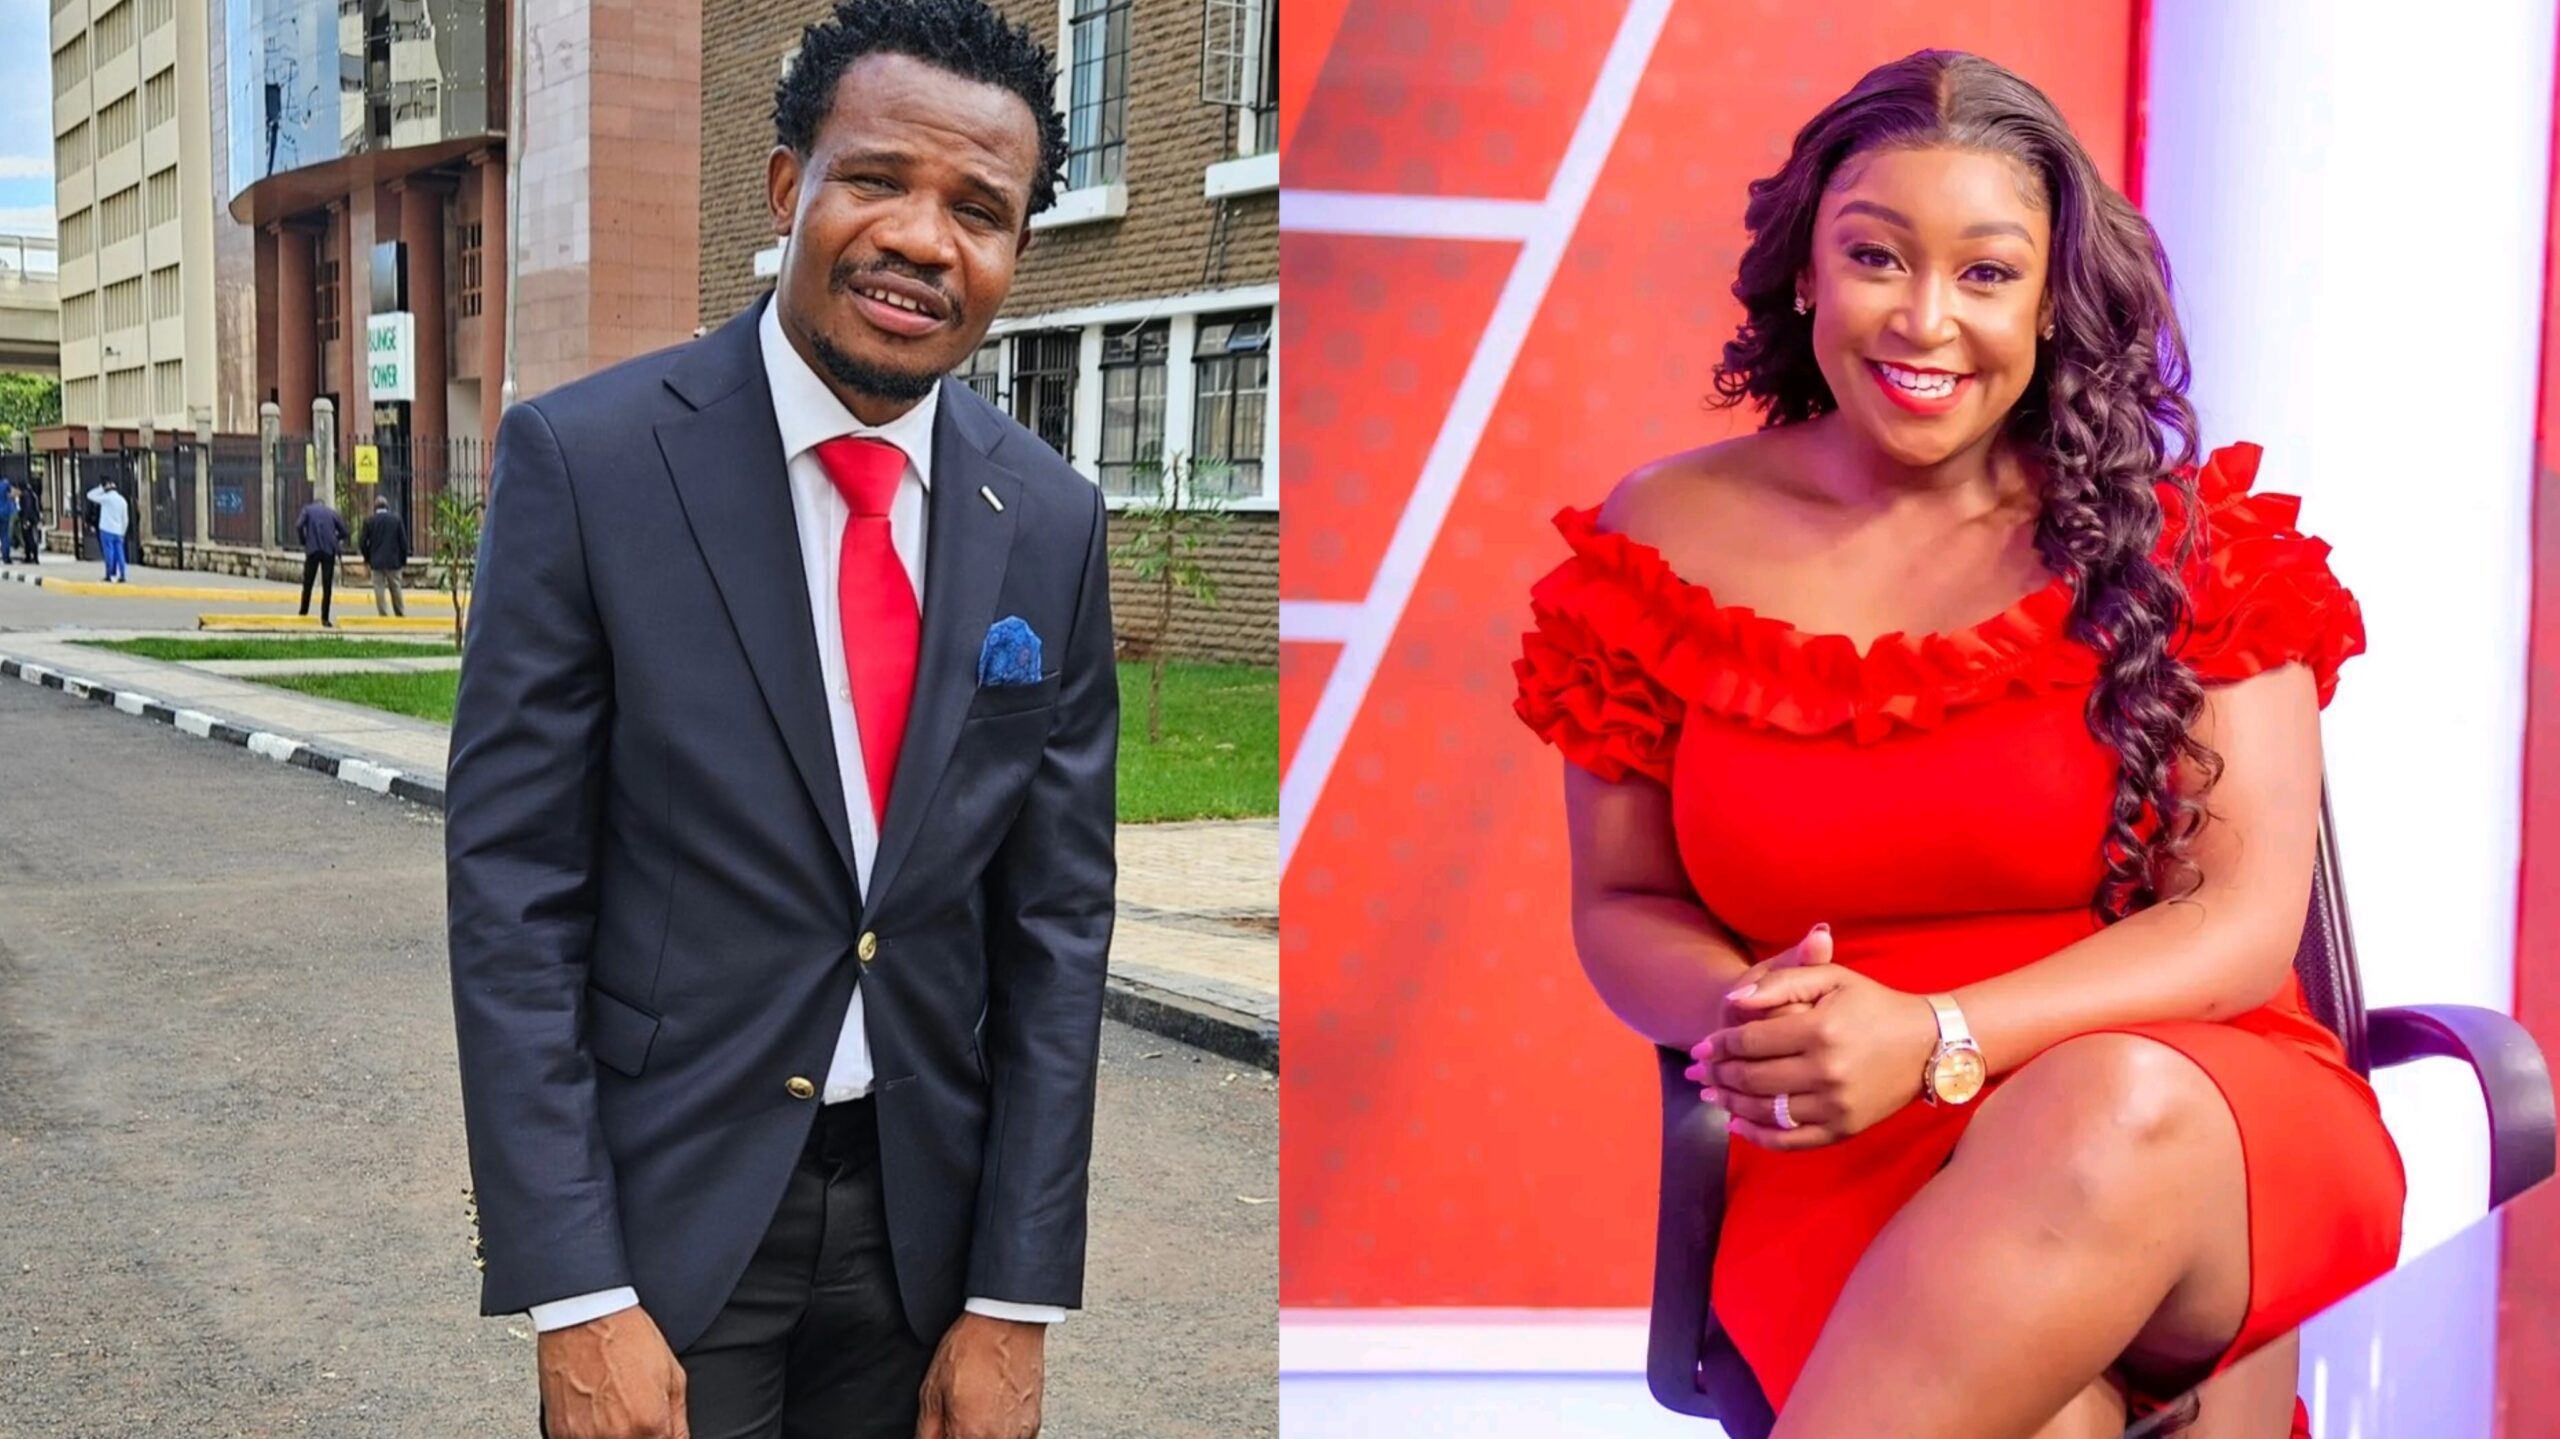 Mumias East MP Peter Salasya has congratulated celebrated news anchor Betty Kyallo on her new role on TV47 noting she is a big brand in Kenya.